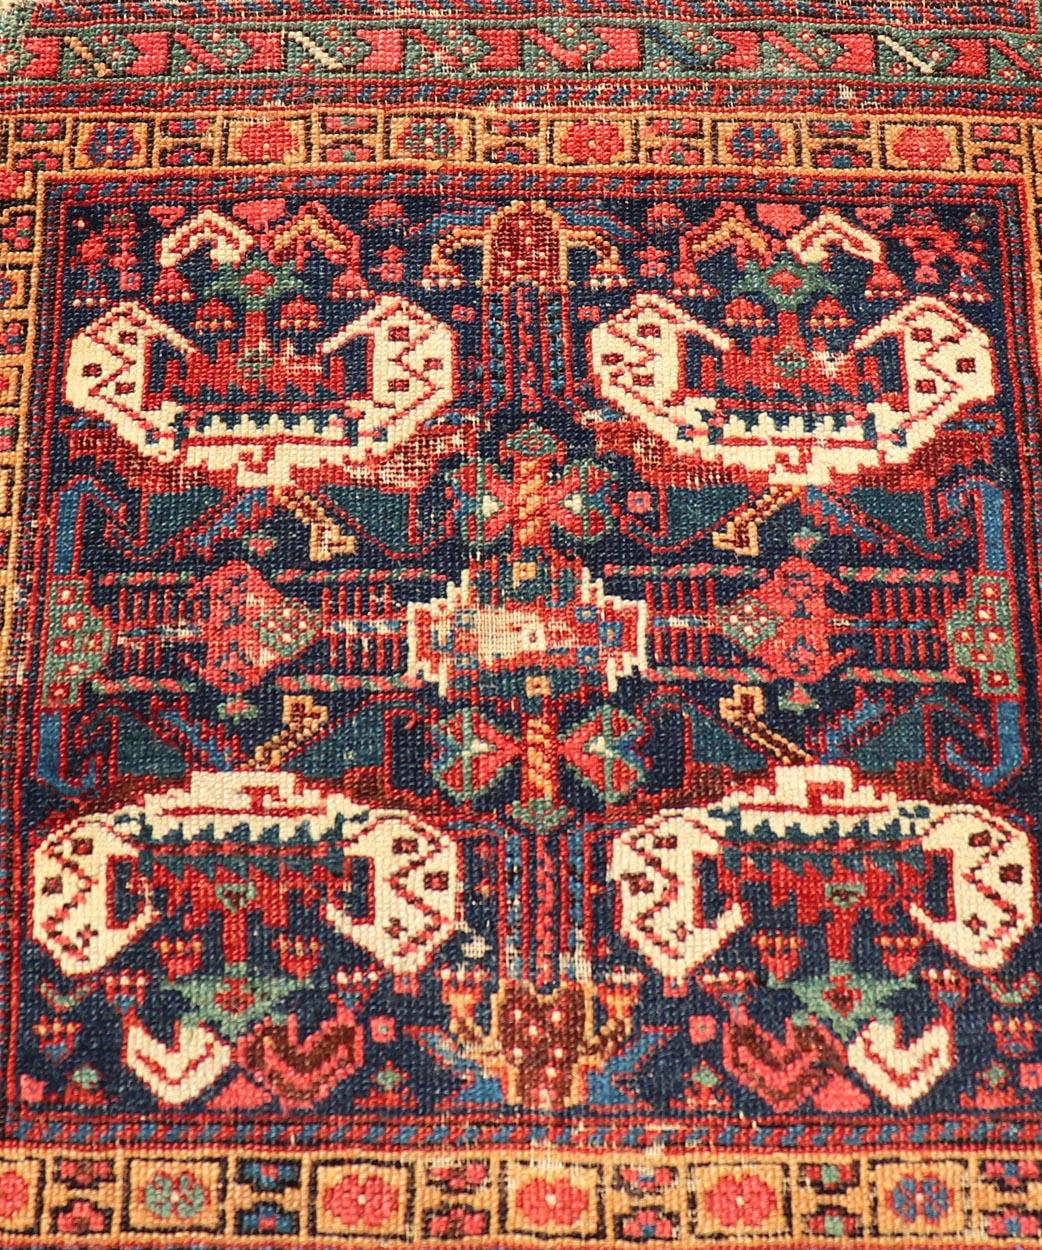 Geometric Design Antique Persian Afshar Rug With Medallion Design. Keivan Woven Arts / rug X23-0310, country of origin / type: Iran / Afshar, circa 1900s. 
Measures: 1'9 x 1'10 
Bold geometry, rich symbolism, and vivid coloration enhance the